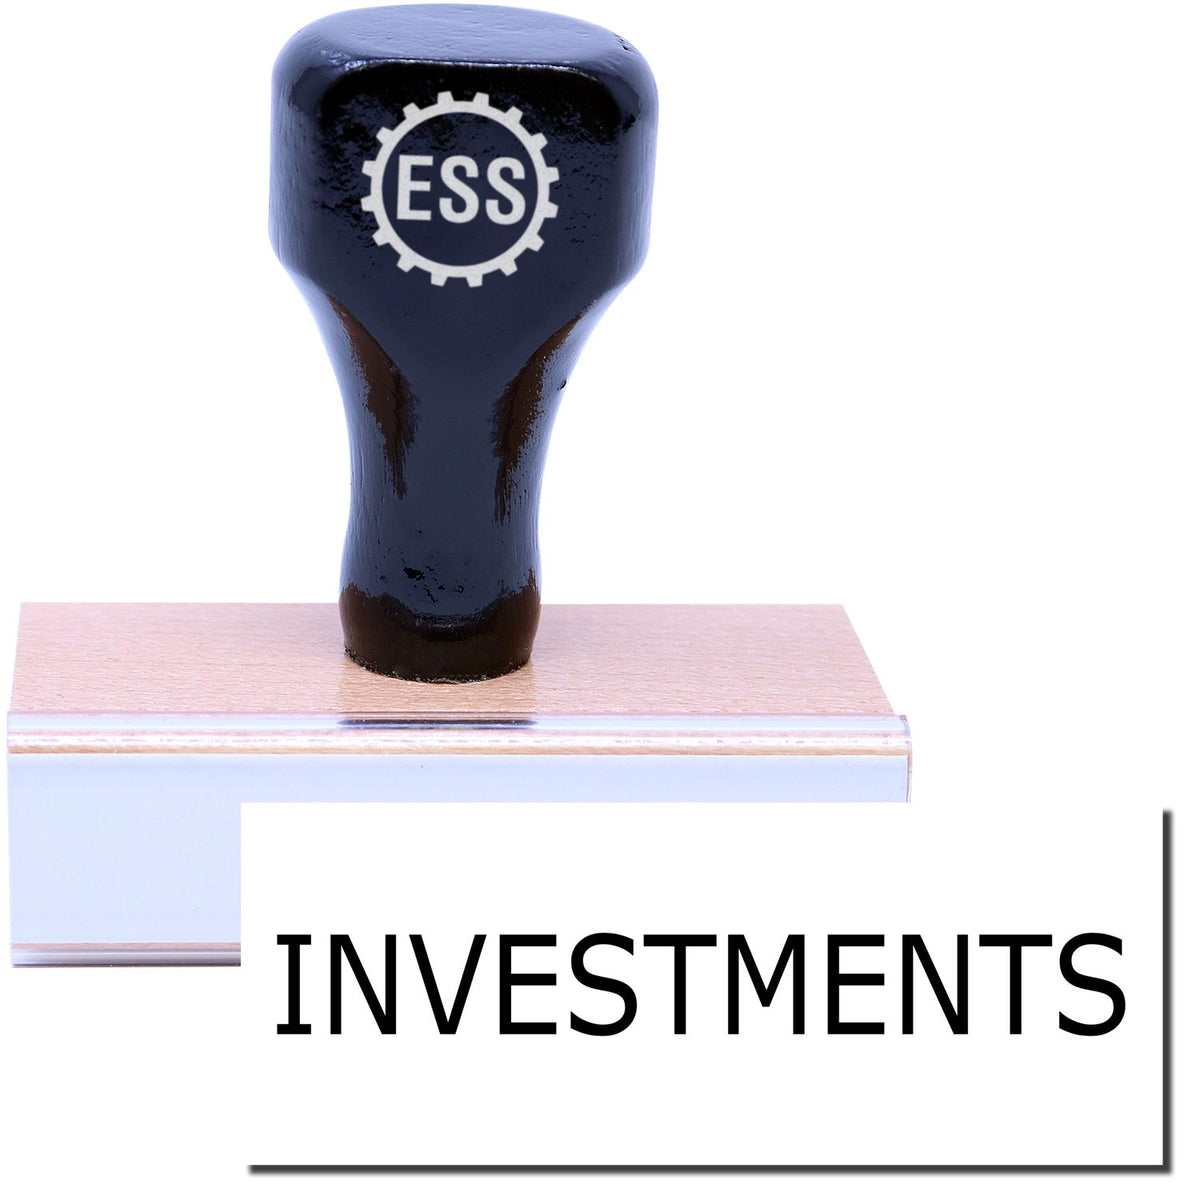 A stock office rubber stamp with a stamped image showing how the text &quot;INVESTMENTS&quot; is displayed after stamping.